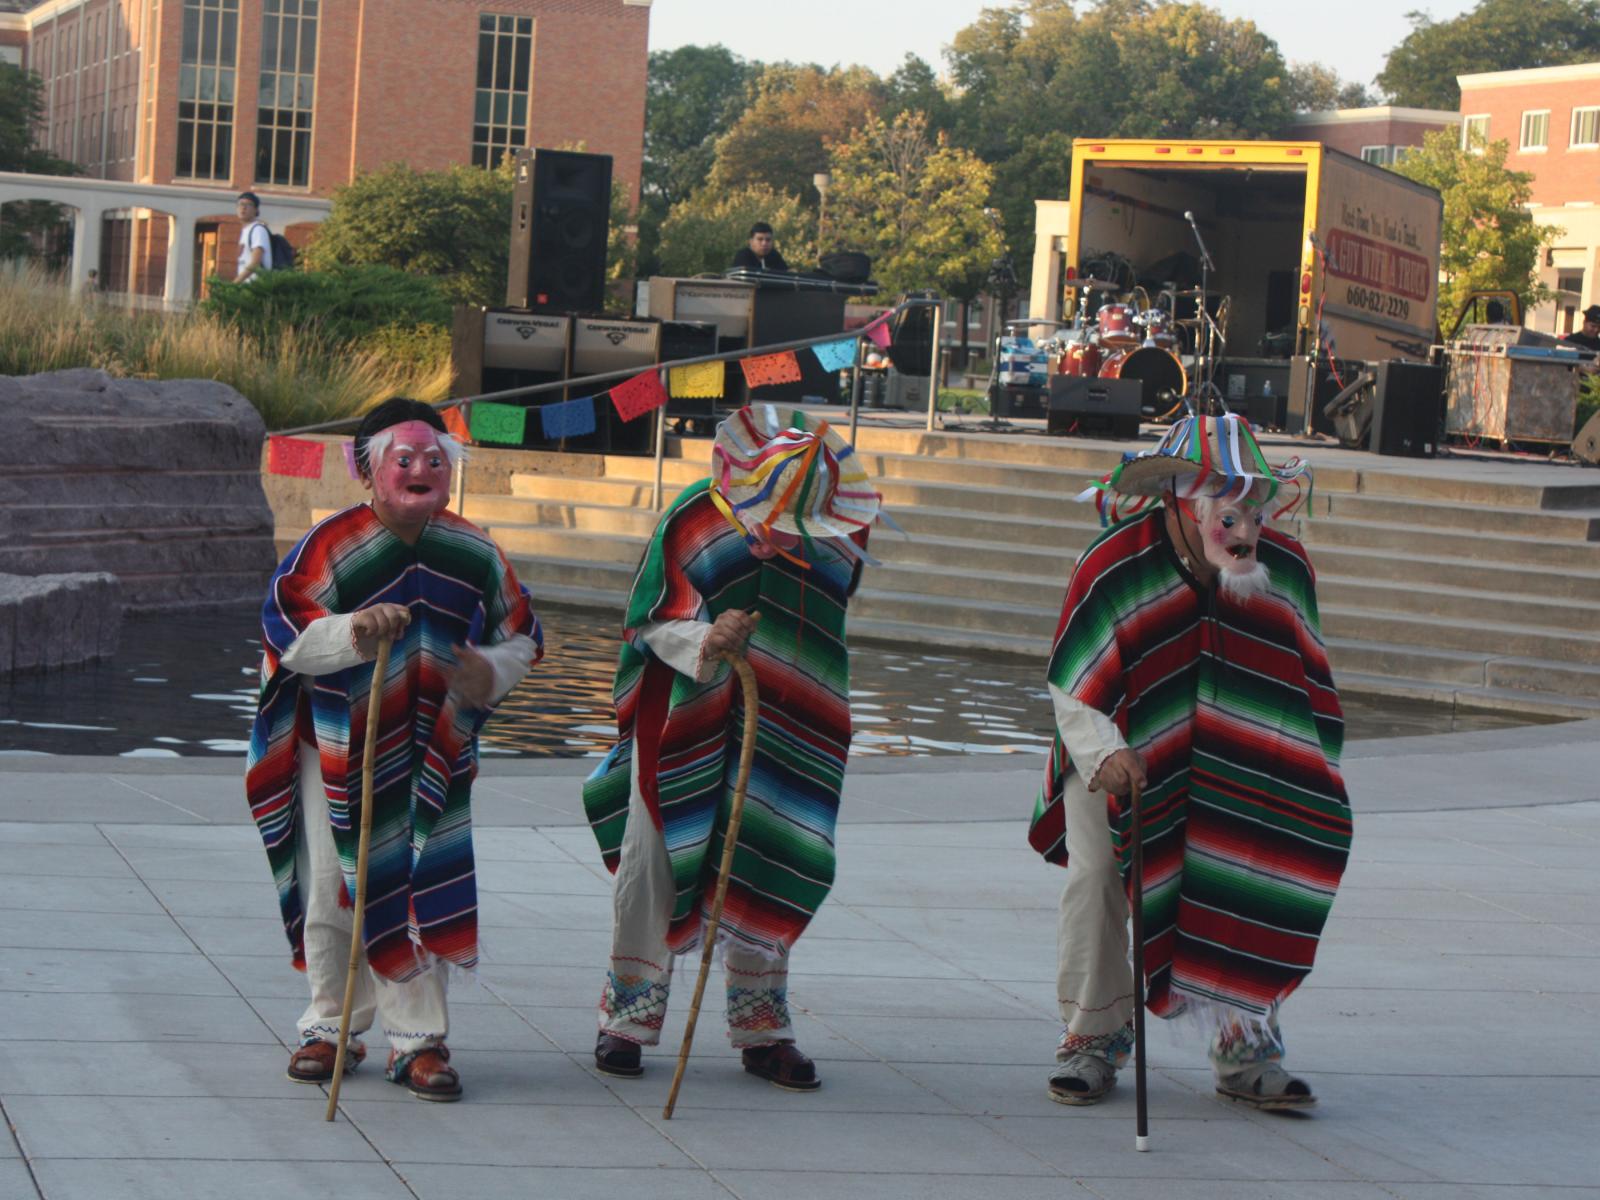 Men perform a dance at Fiesta on the Green at the University of Nebraska-Lincoln.